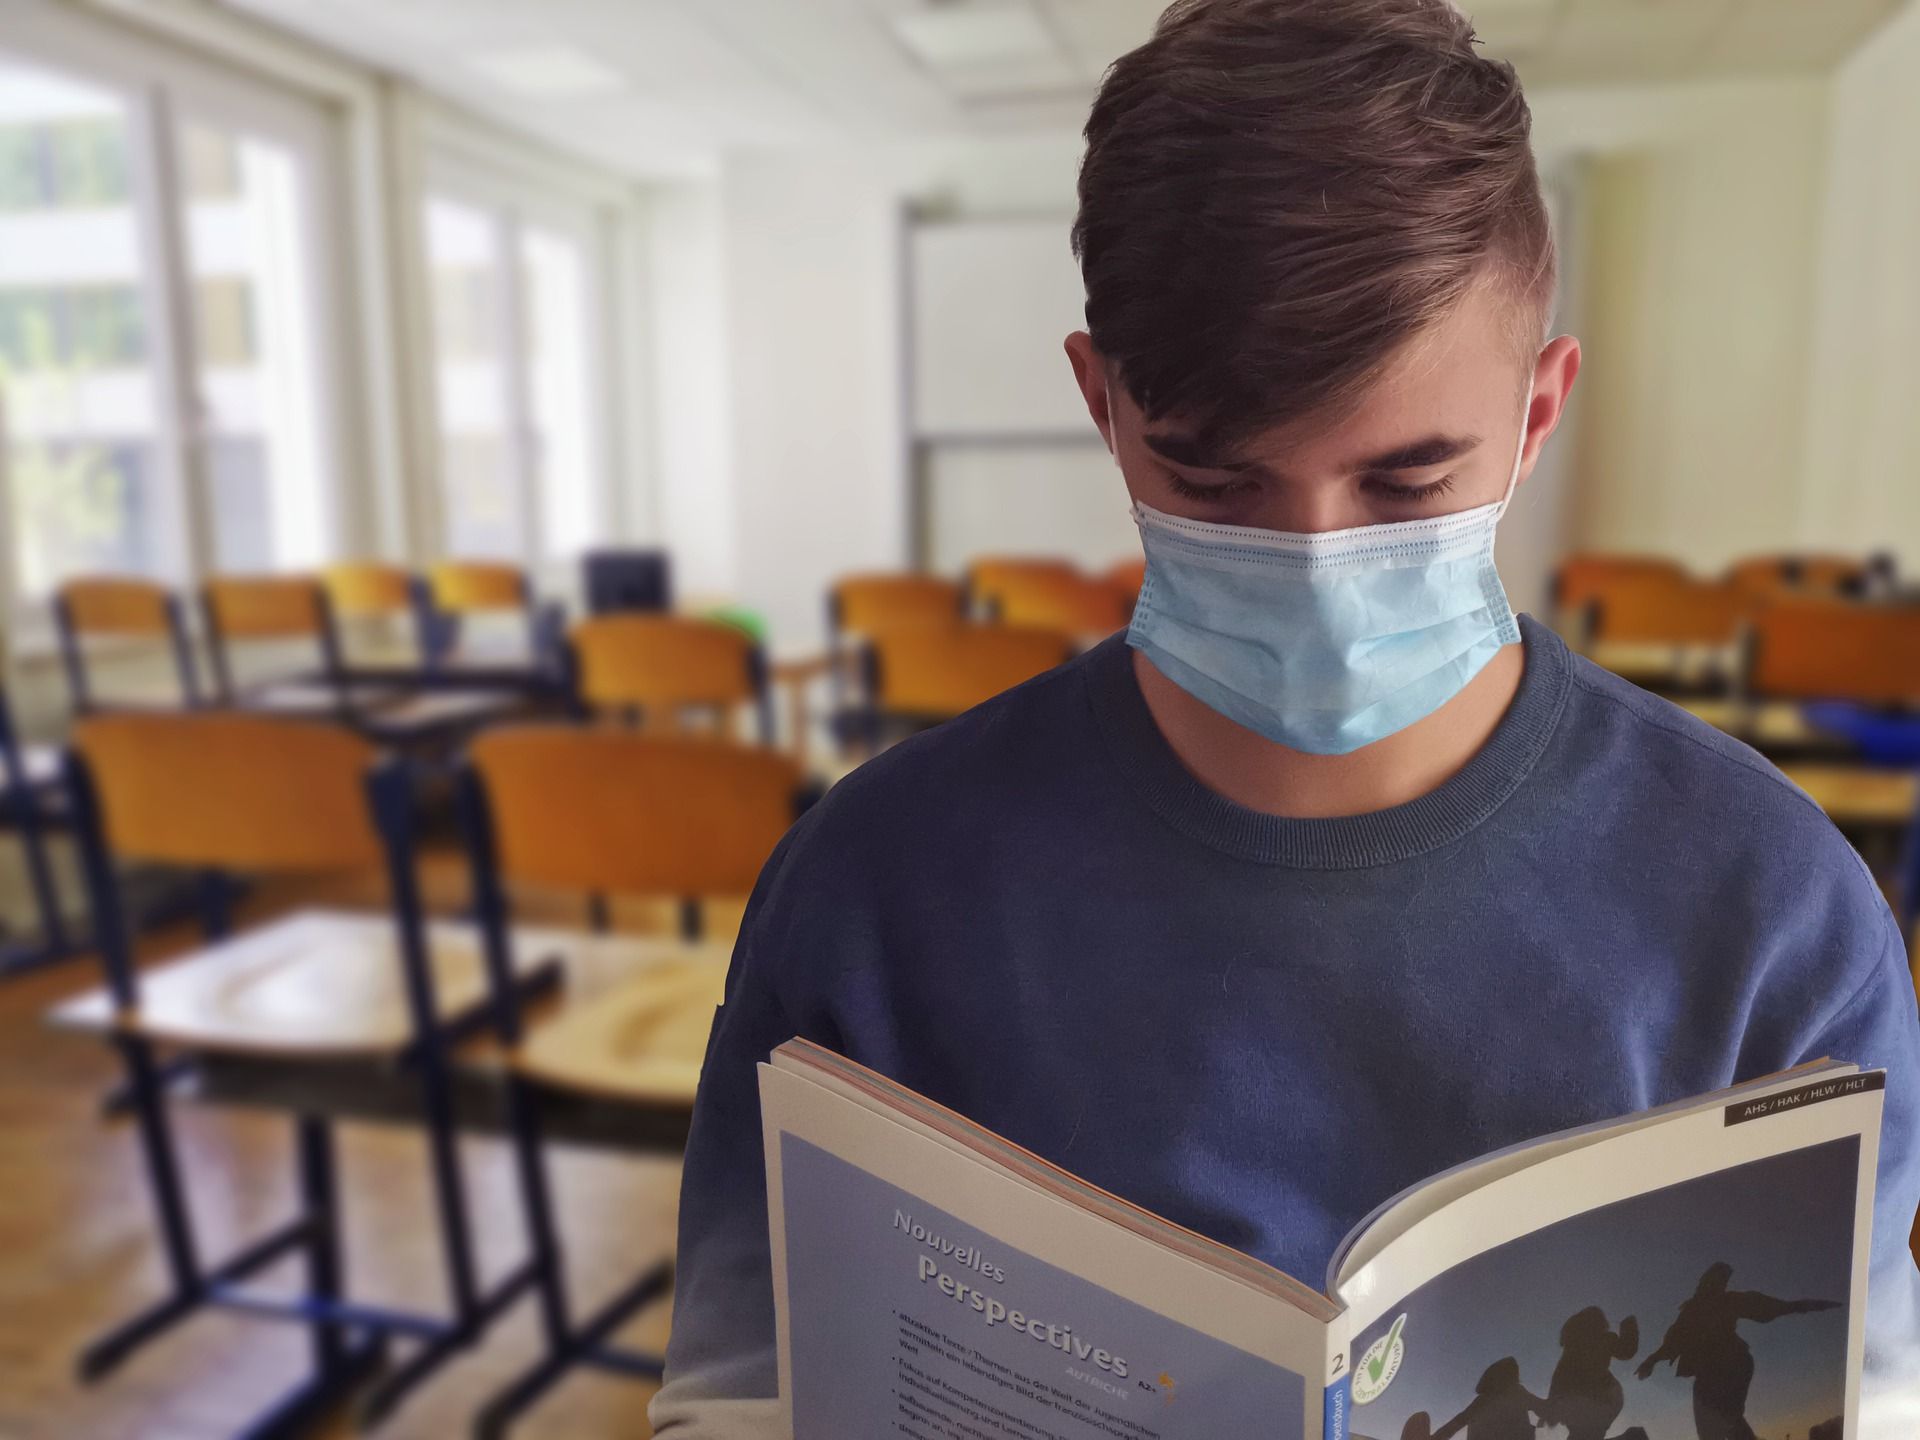 Face masks optional in many New York schools after mandate ends